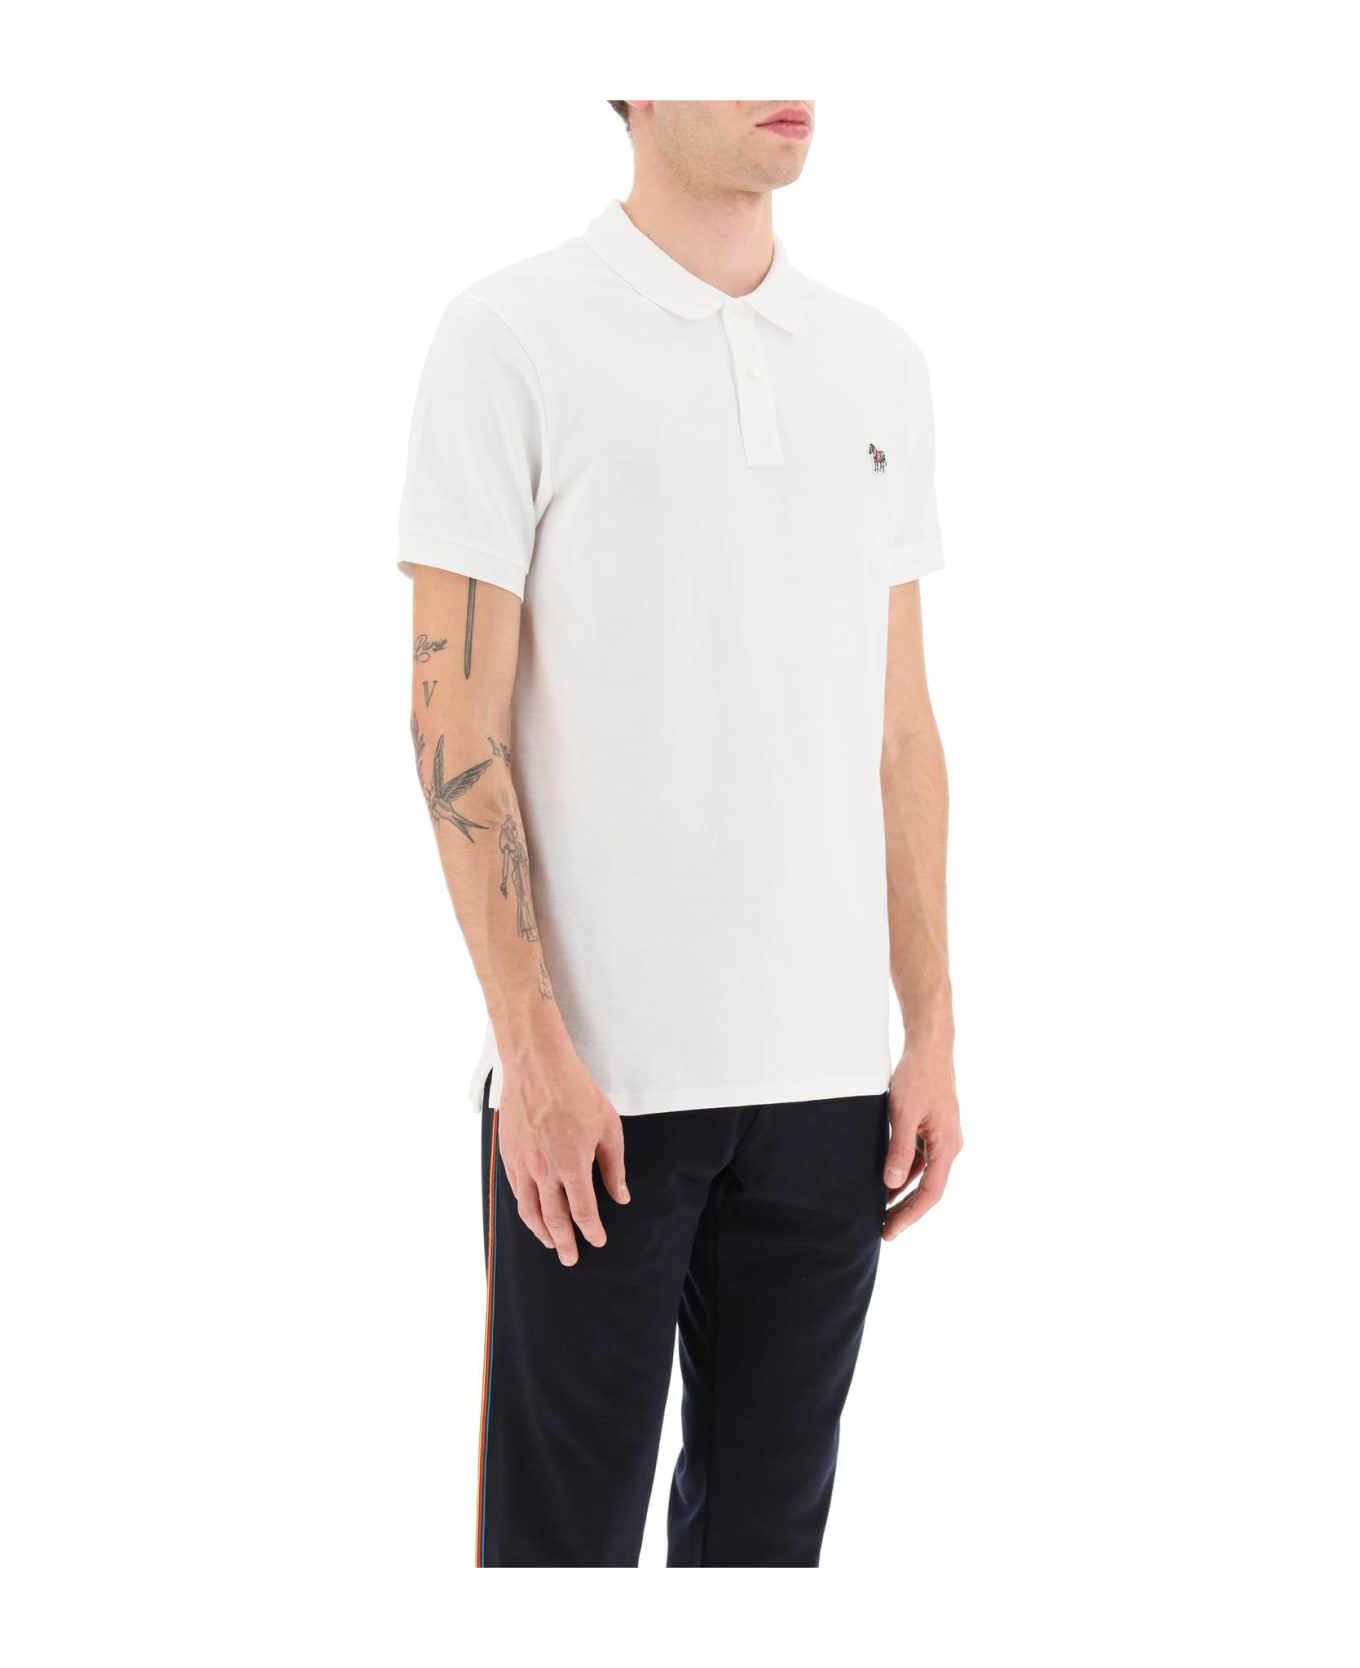 PS by Paul Smith Organic Cotton Slim Fit Polo Shirt - WHITE (White)